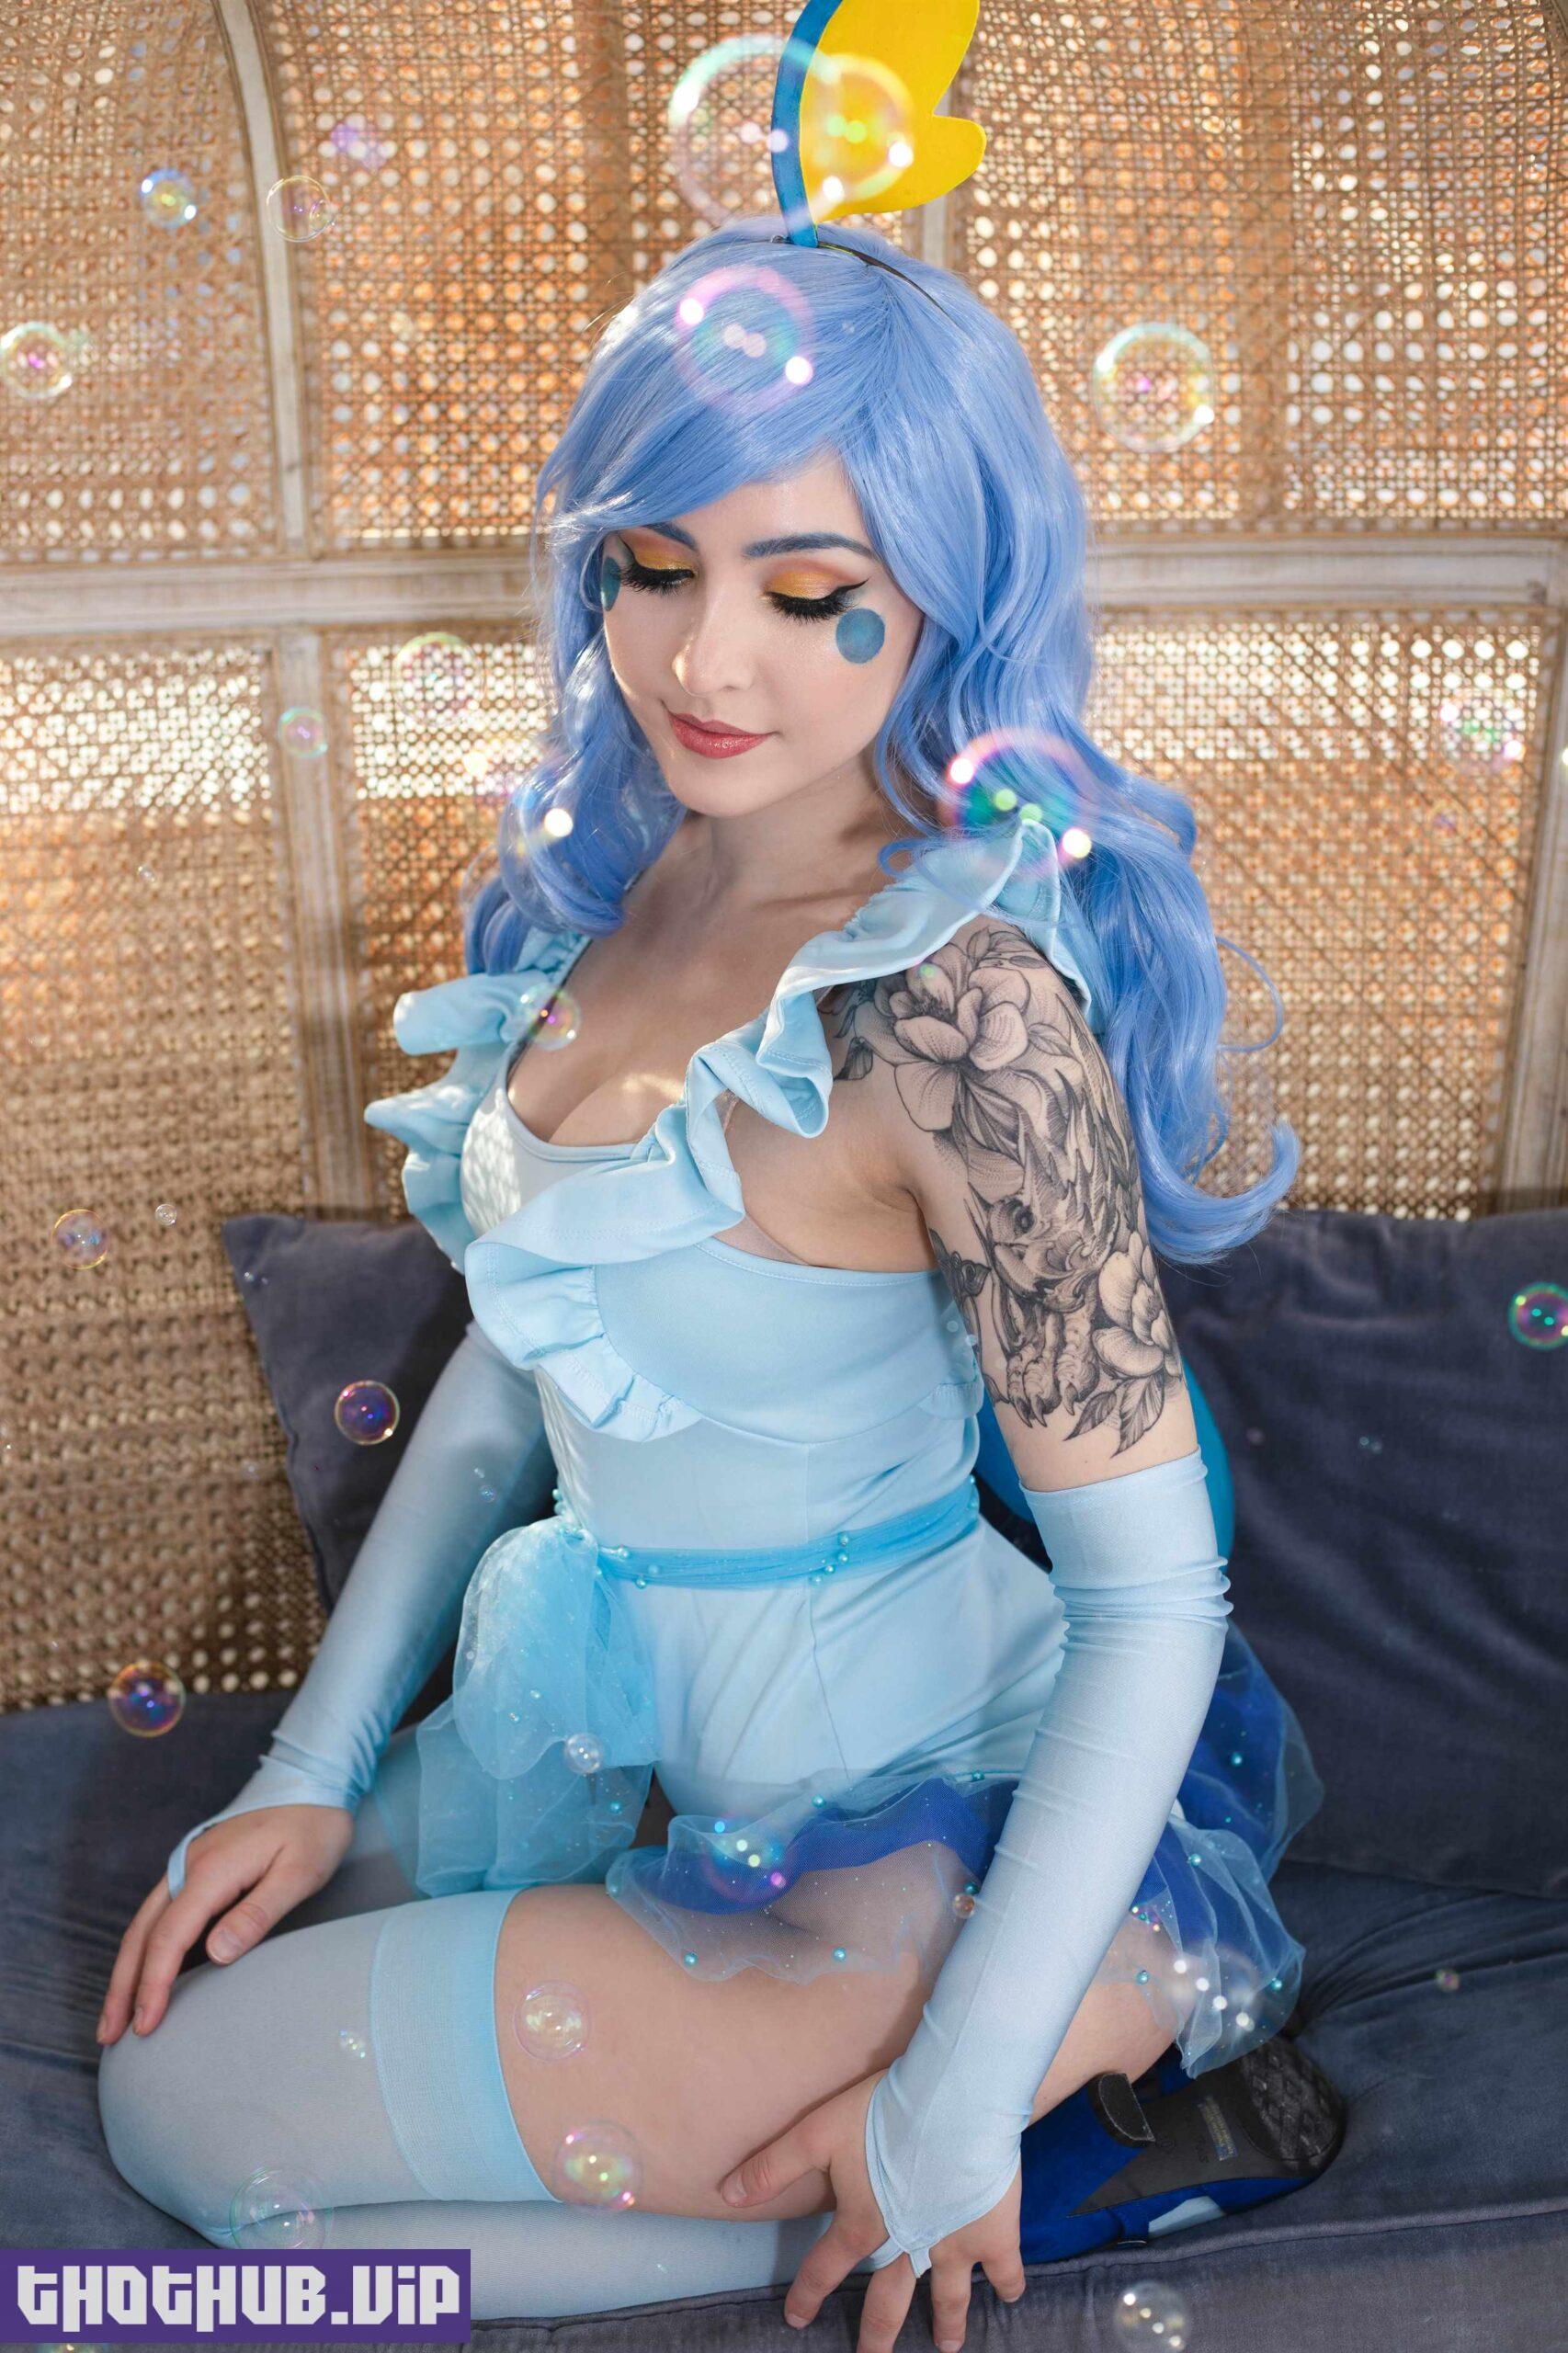 1649959748 978 Luxlo Cosplay Sobble 20 scaled